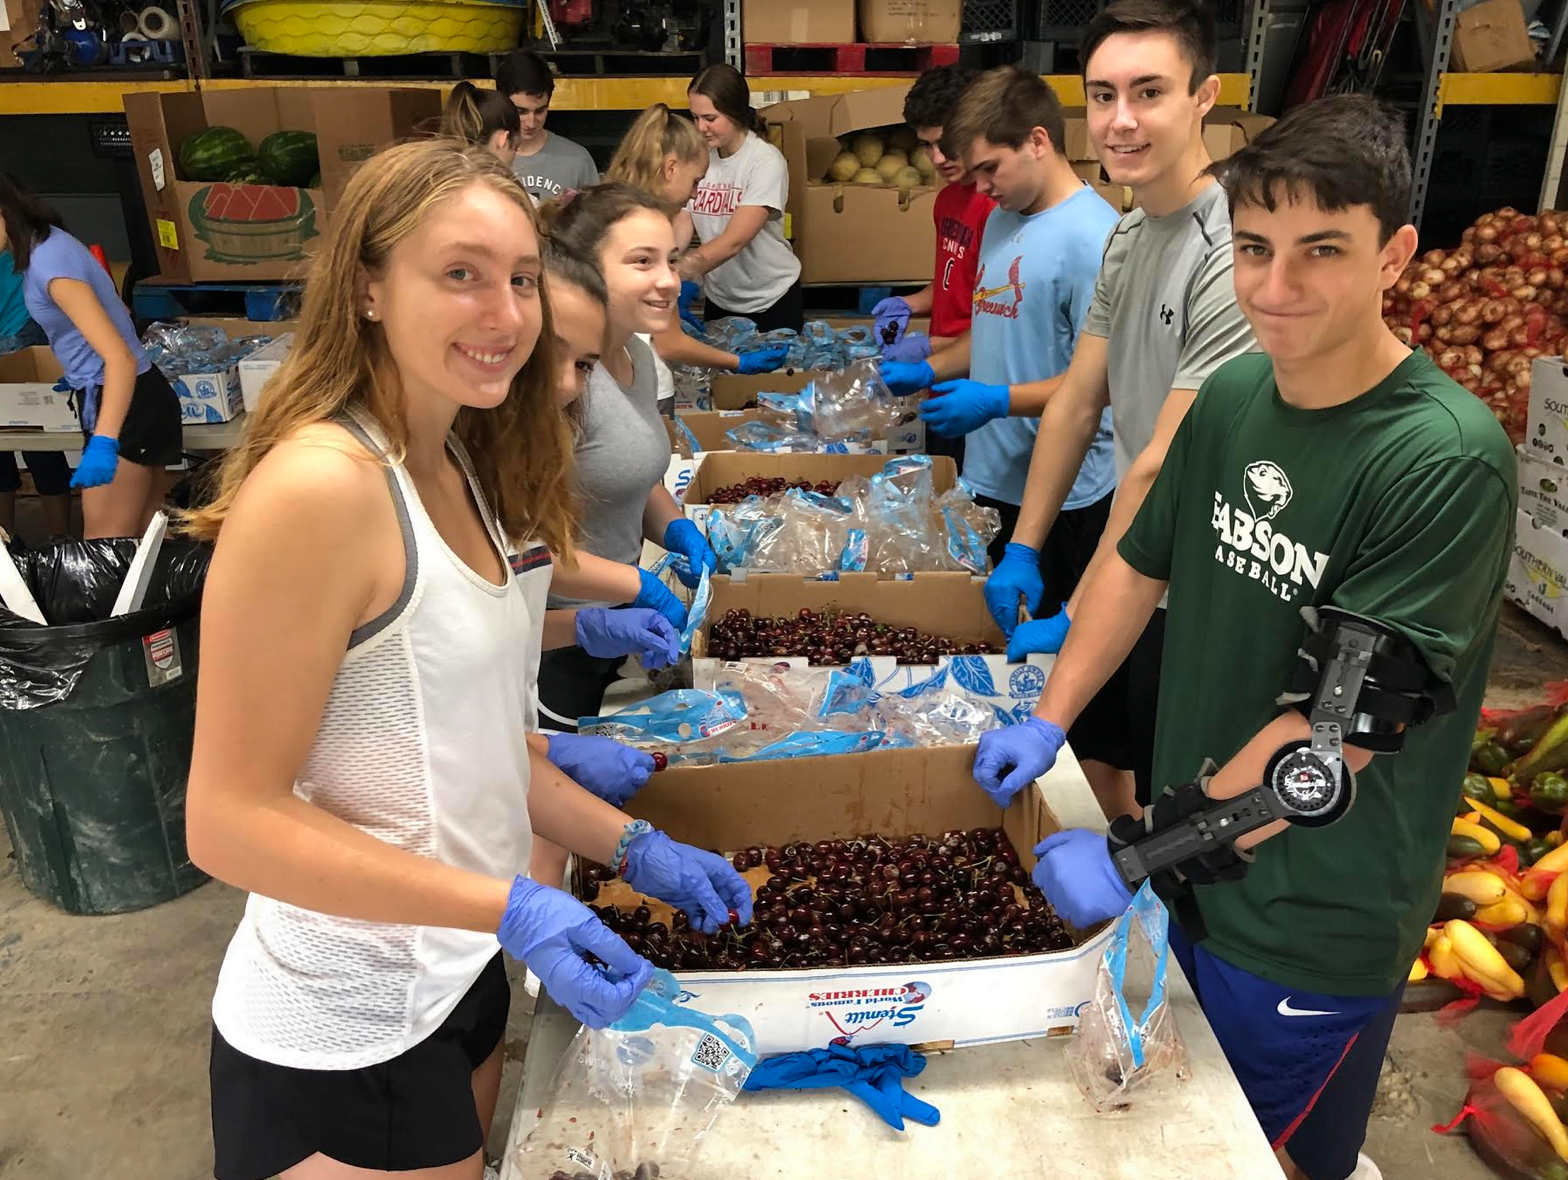 Working in the RAMP Food Pantry in Martin County, Kentucky, are Abby Shropshire, Jessica Murphy, Max Feenstra and Jake Mondschein (front four) sorting and packaging cherries to be distributed to families in need.